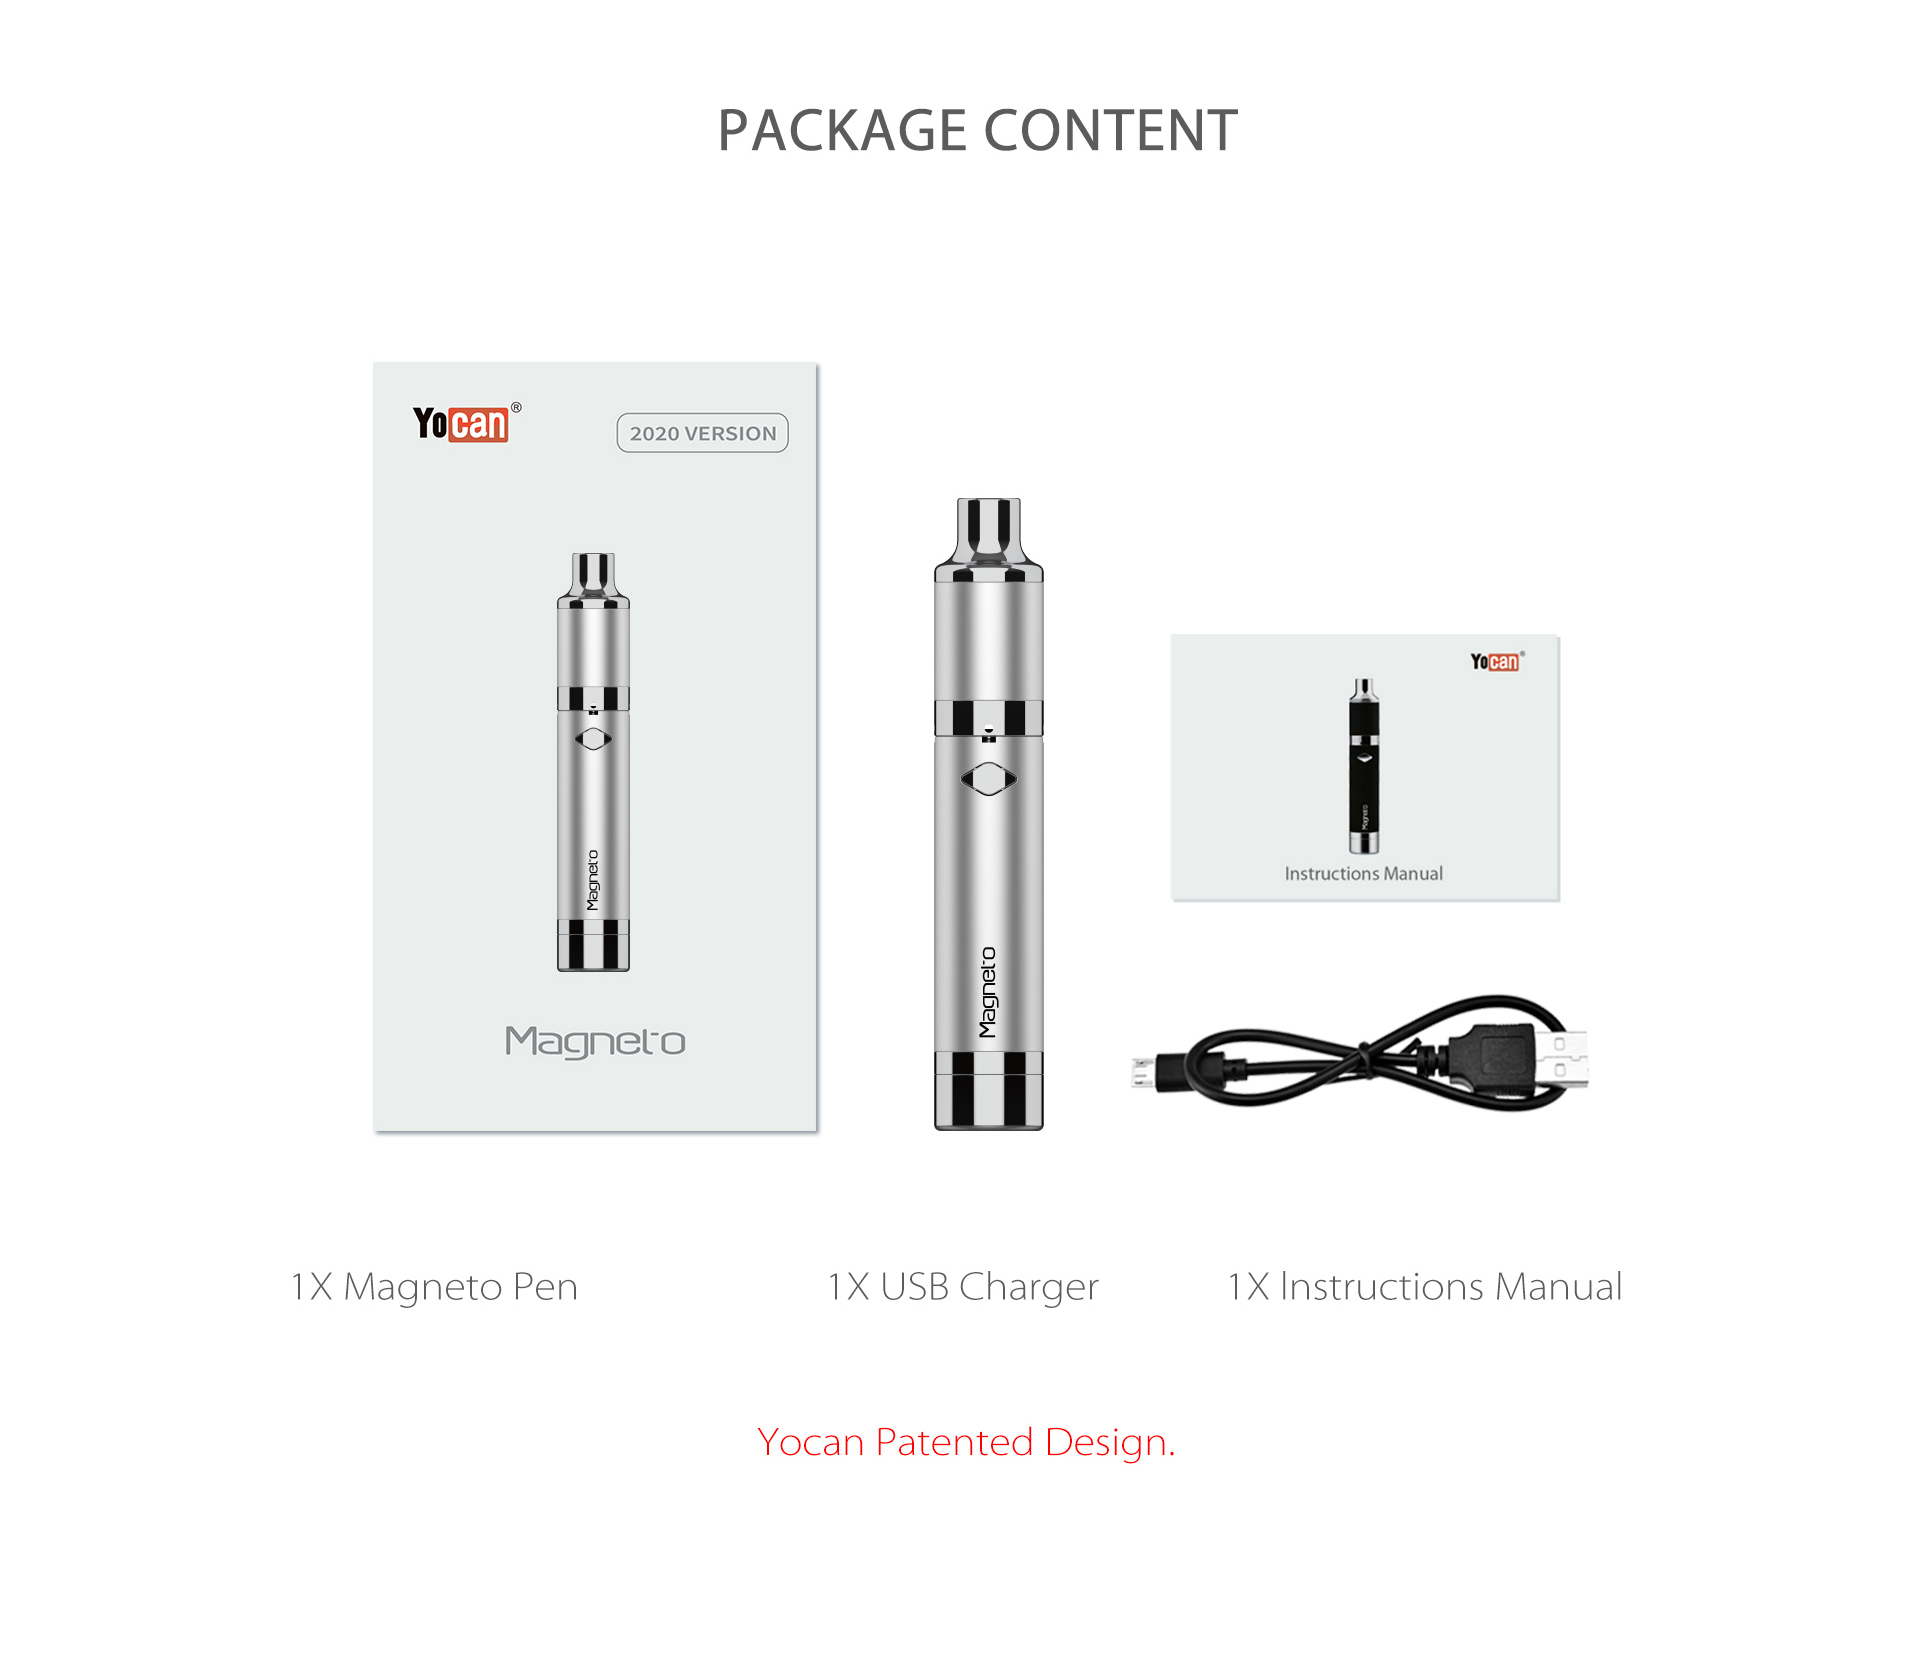 Yocan Magneto concentrate vaporizer pen 2020 version package content.